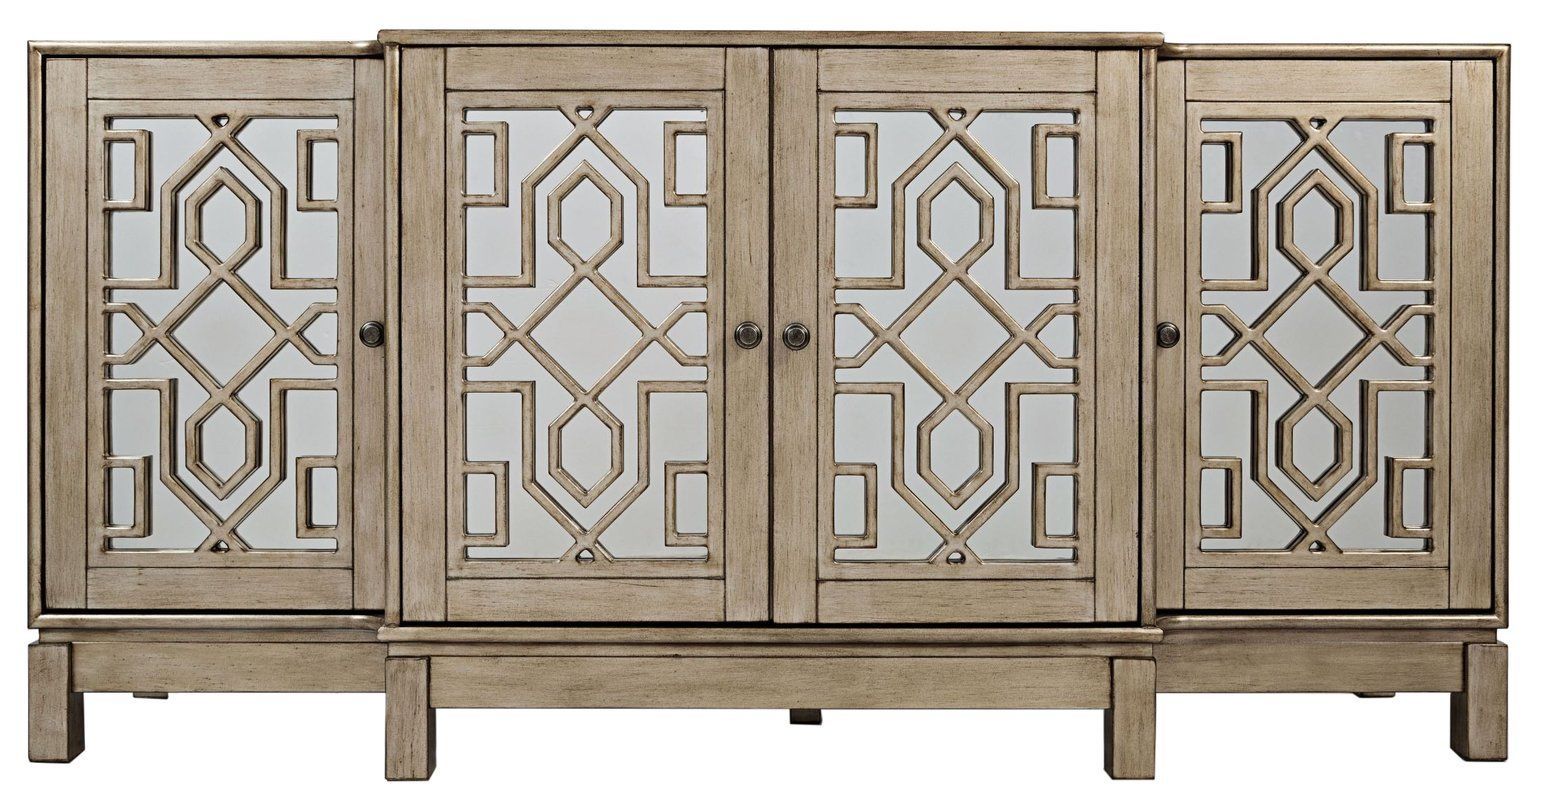 Stillwater Sideboard | For The Imaginary House | Sideboard Within Recent Stillwater Sideboards (View 1 of 20)